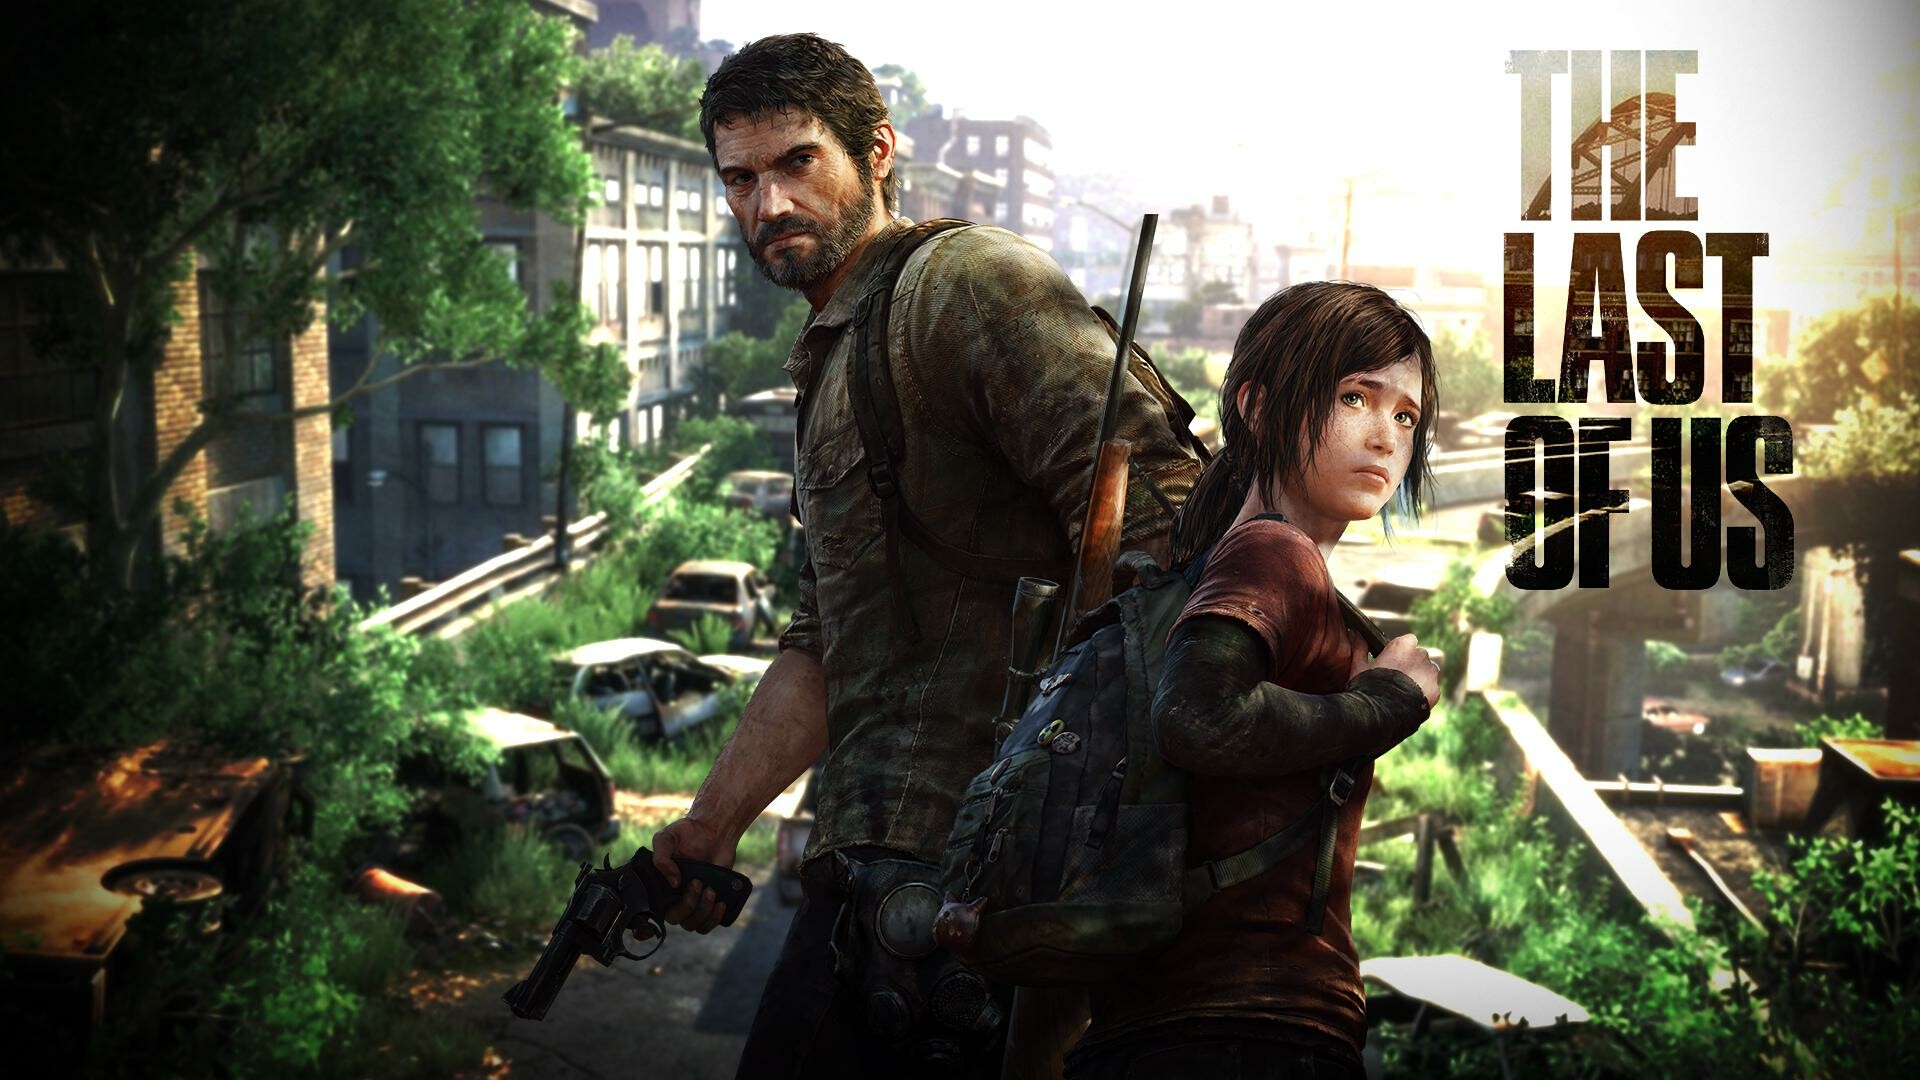 The Last of Us: The world and environments of the game drew acclaim from many reviewers, The post-apocalyptic United States. 1920x1080 Full HD Wallpaper.